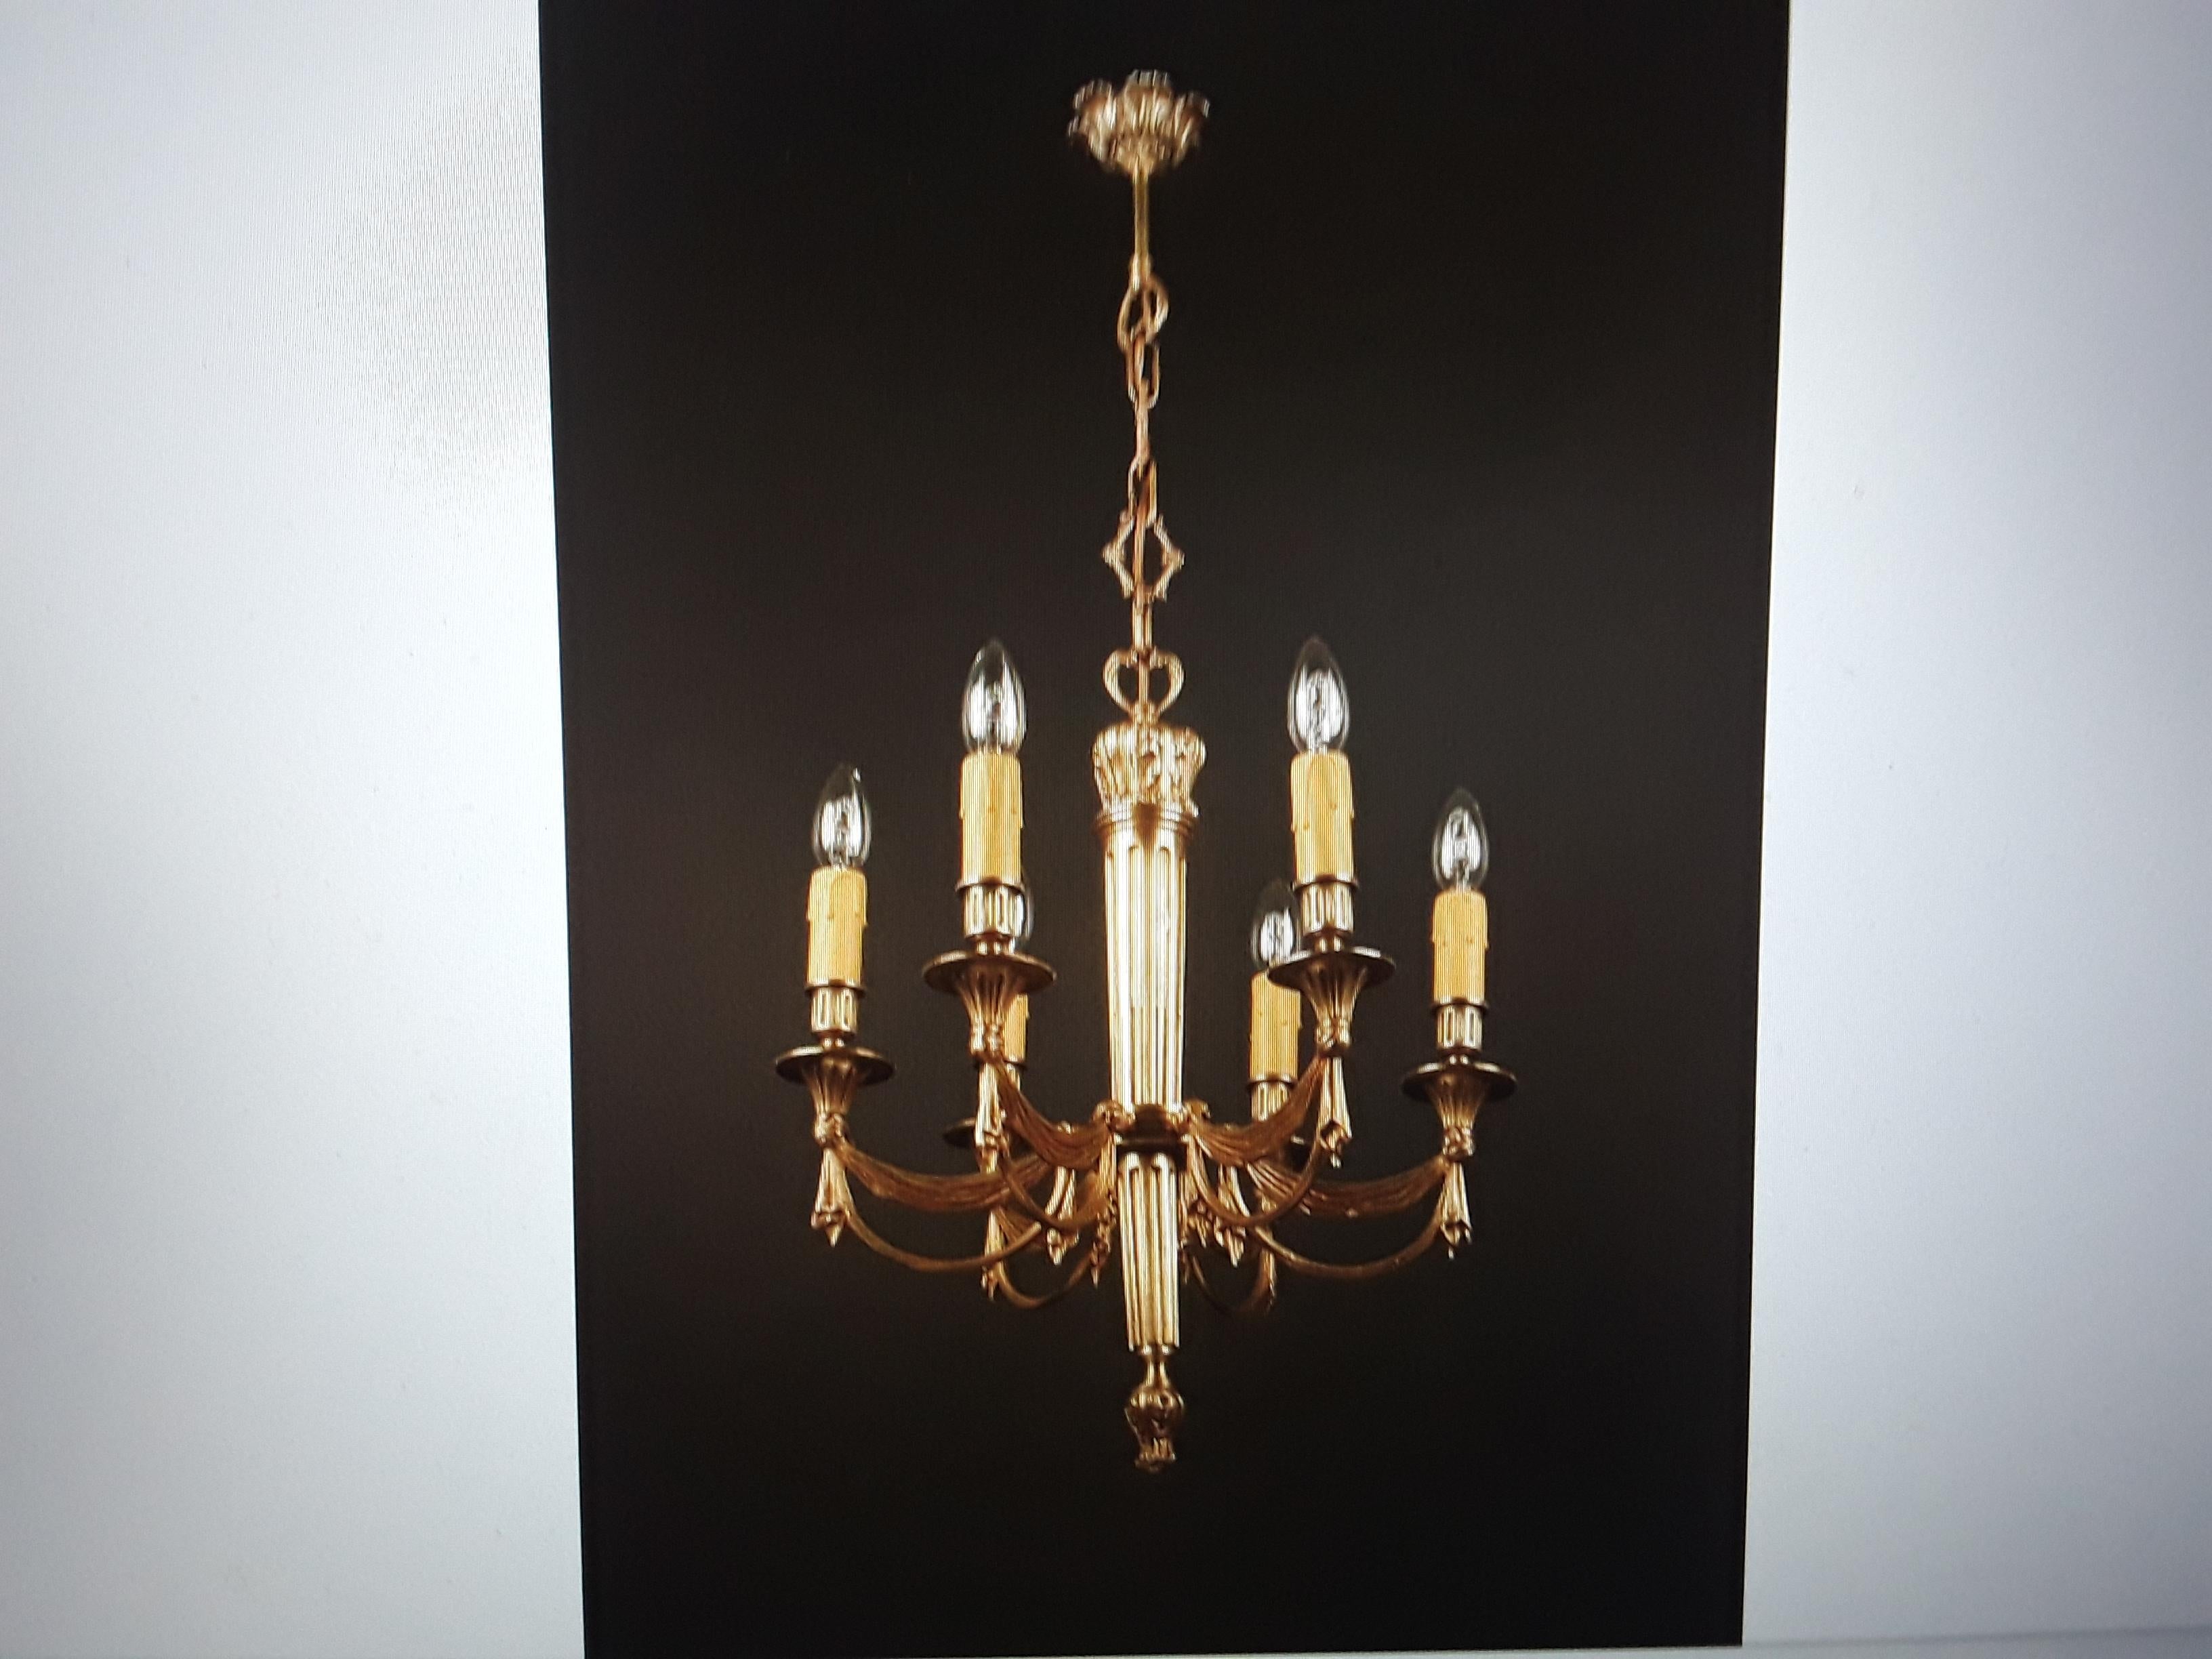 Spectacular 1930's French Empire Dore Bronze Chandelier. Bronze drapery swag detail. With Neoclassical elements. Attributed to Maison Bagues.